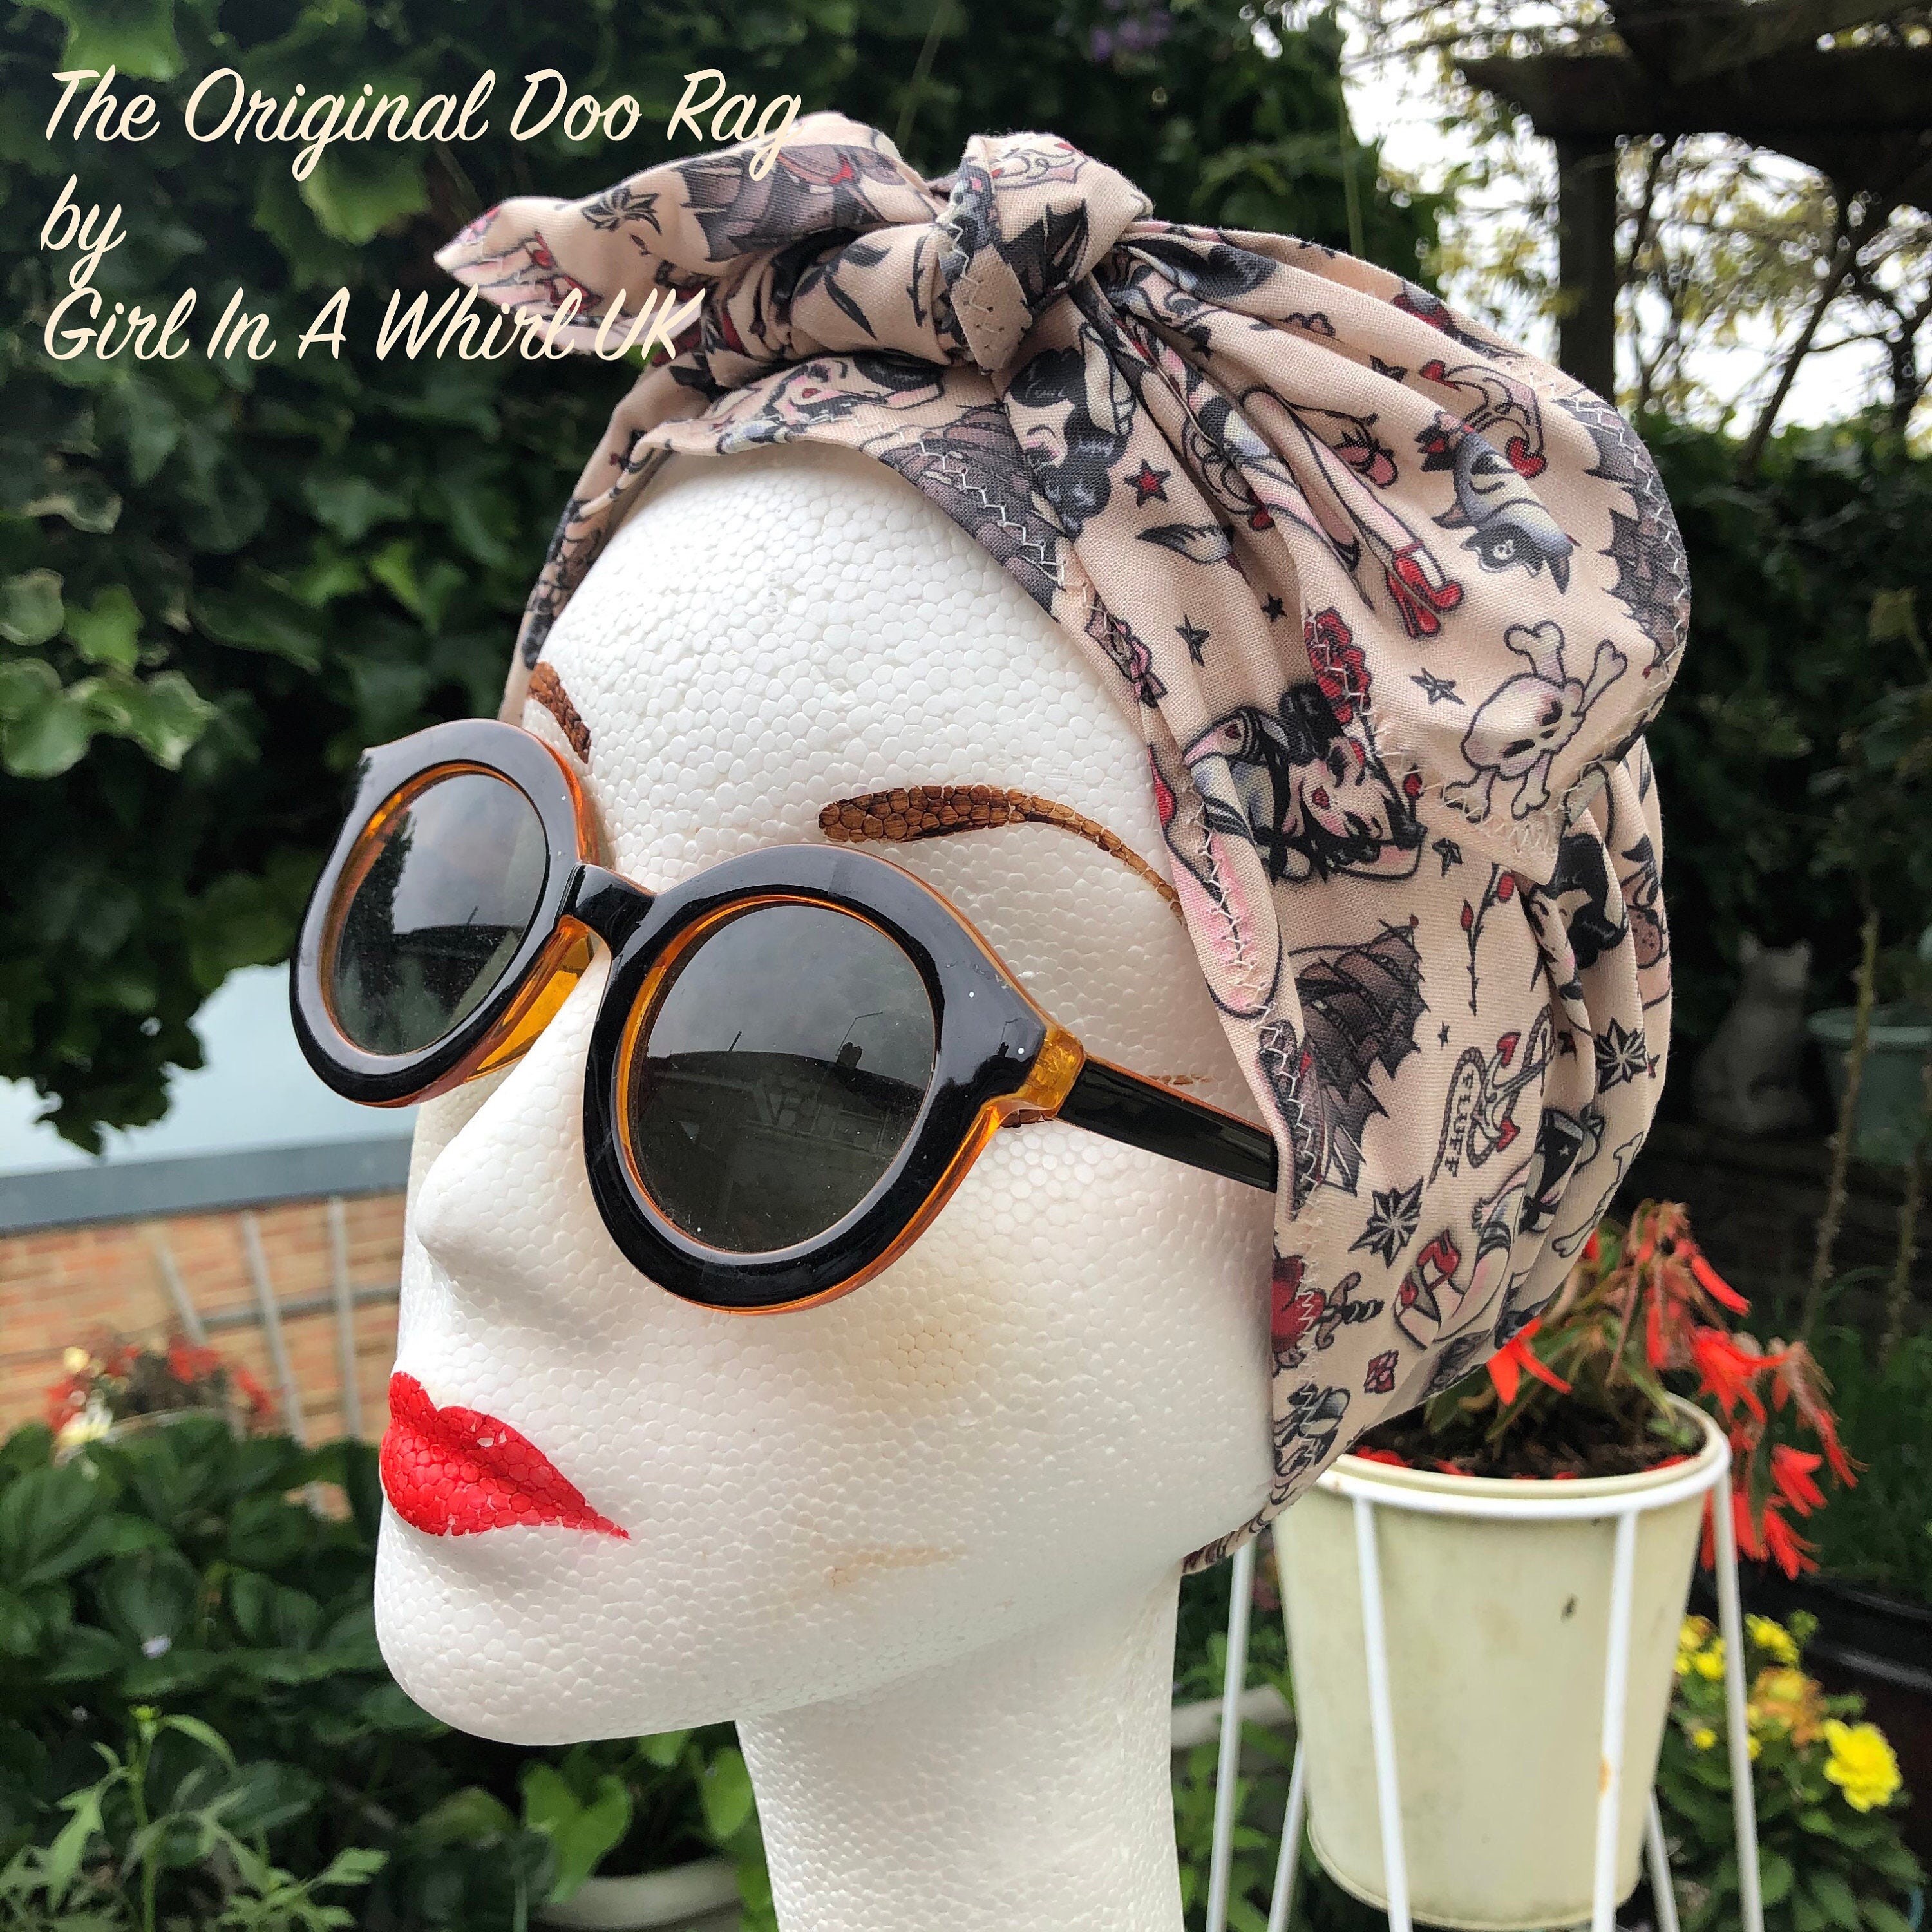 Channel your inner Rosie the Riveter Shaped headscarfturban for your vintage hairdos 1940's 50's style! The Original Doo-Rag